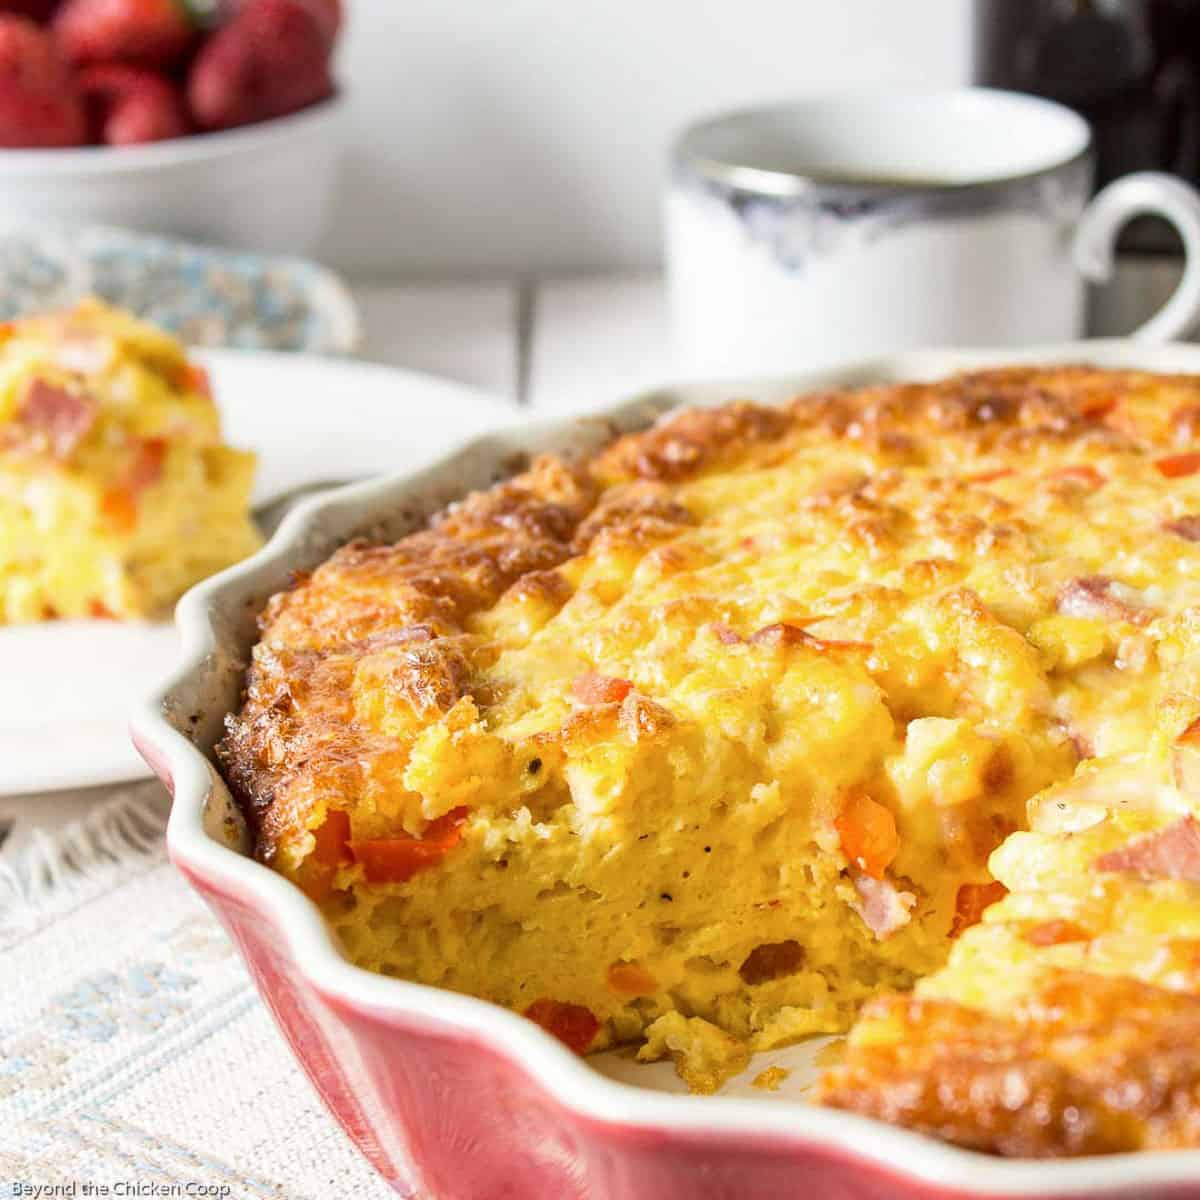 An egg casserole in a pink colored pie dish.